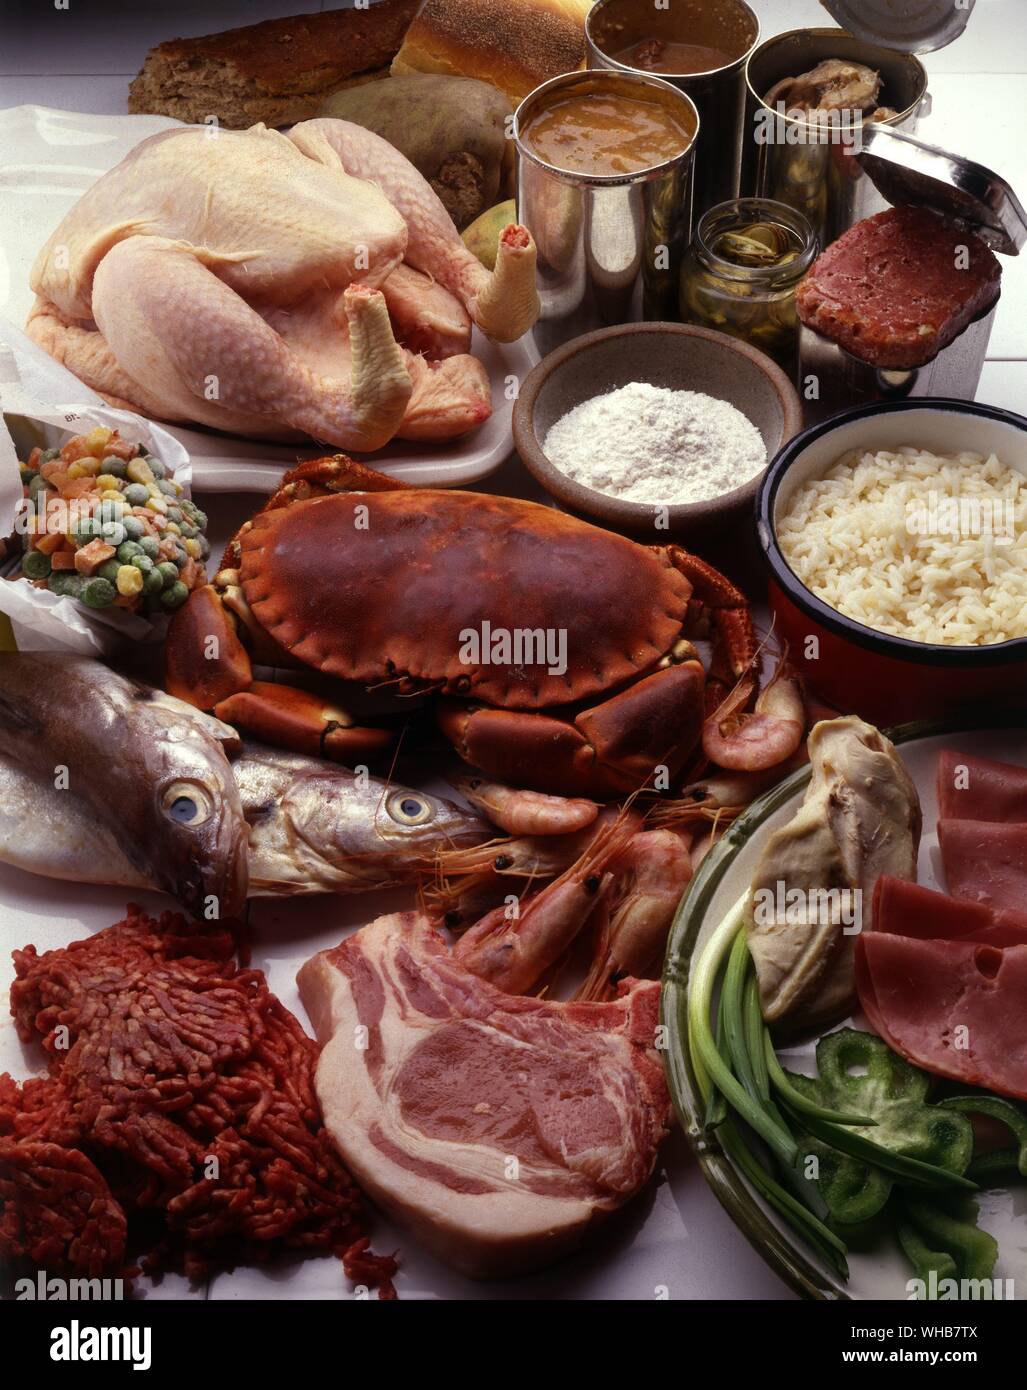 Food - crab chicken fishes chops pork chops mince mincemeat prawns corned beef fish eye. Stock Photo